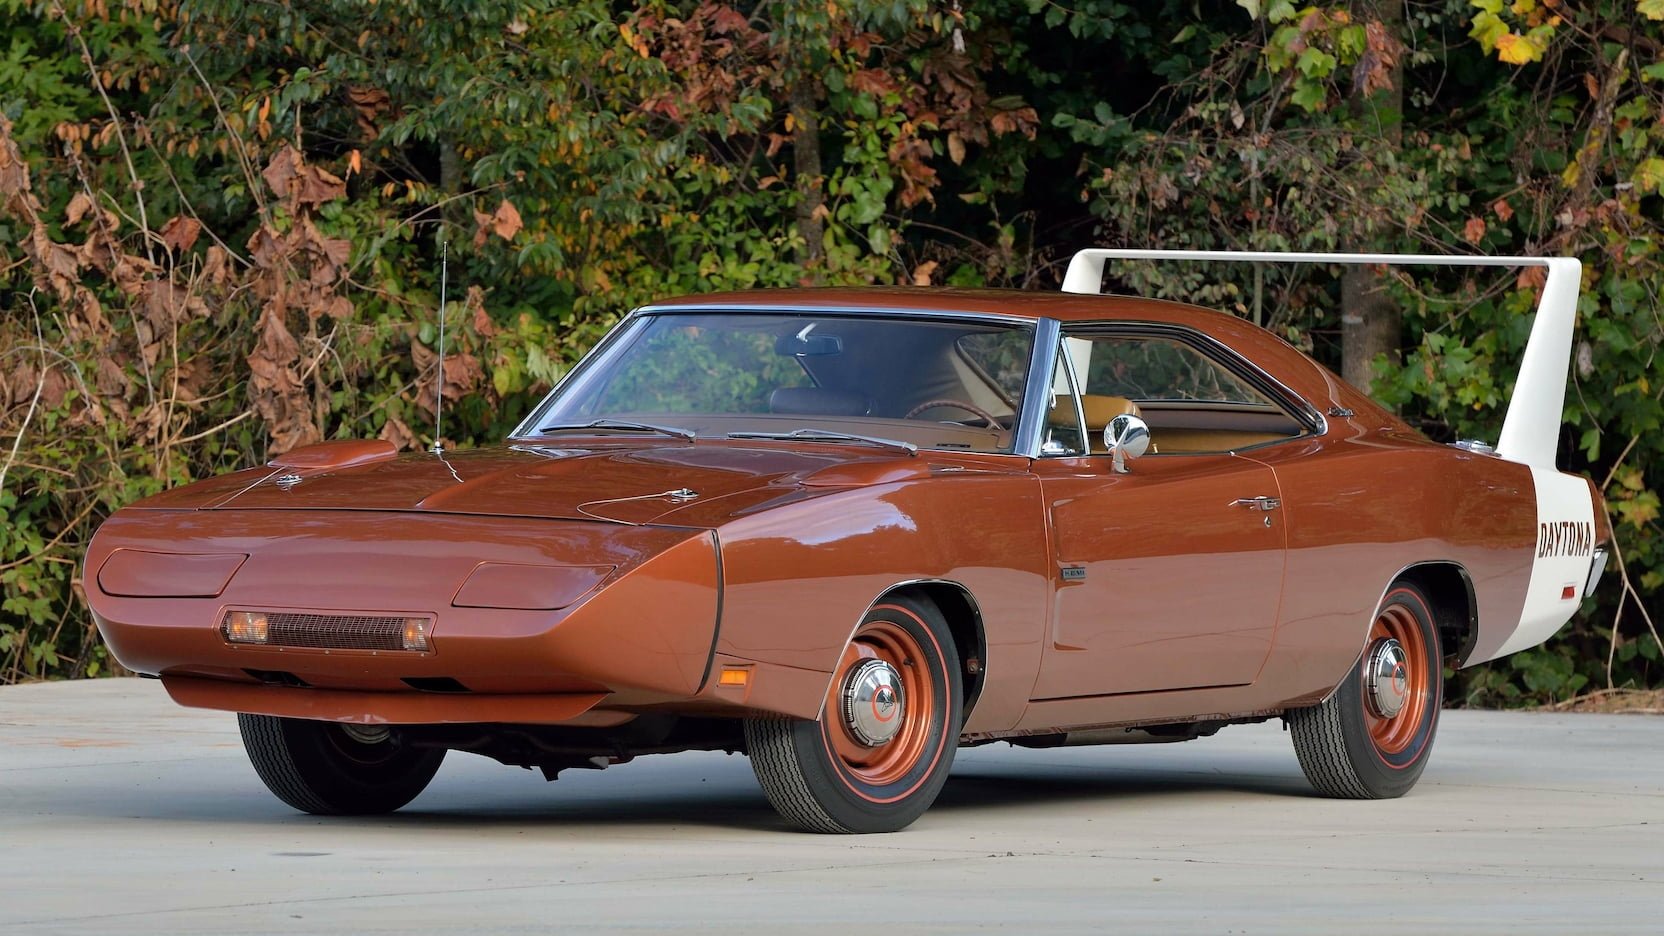 1969 dodge charger hemi daytona - the most expensive dodge charger.